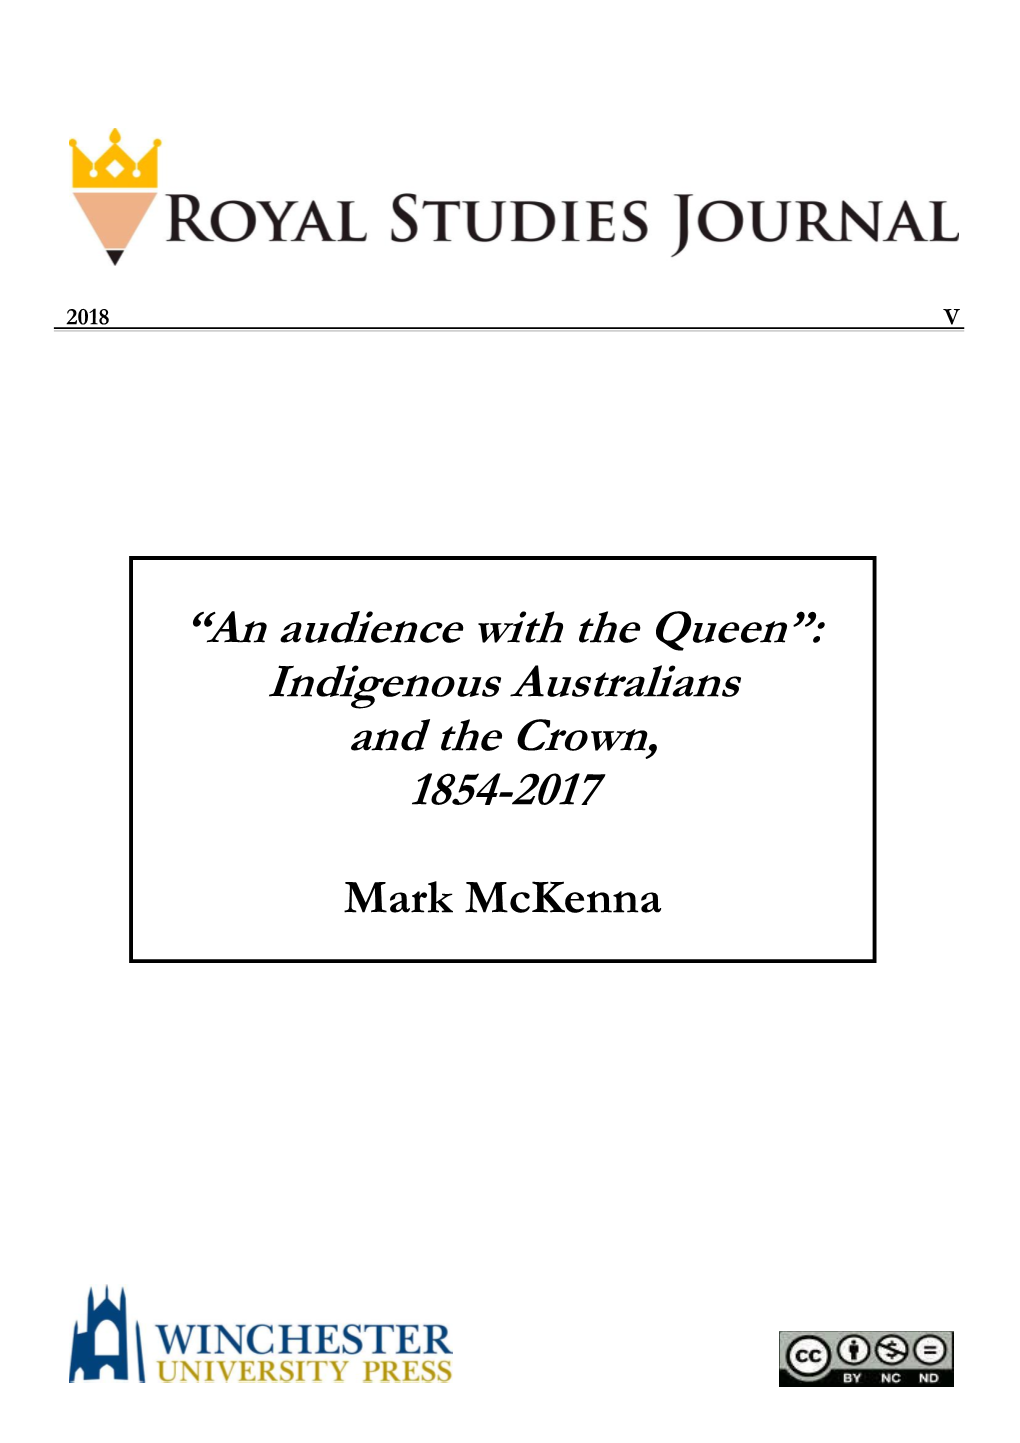 “An Audience with the Queen”: Indigenous Australians and the Crown, 1854-2017